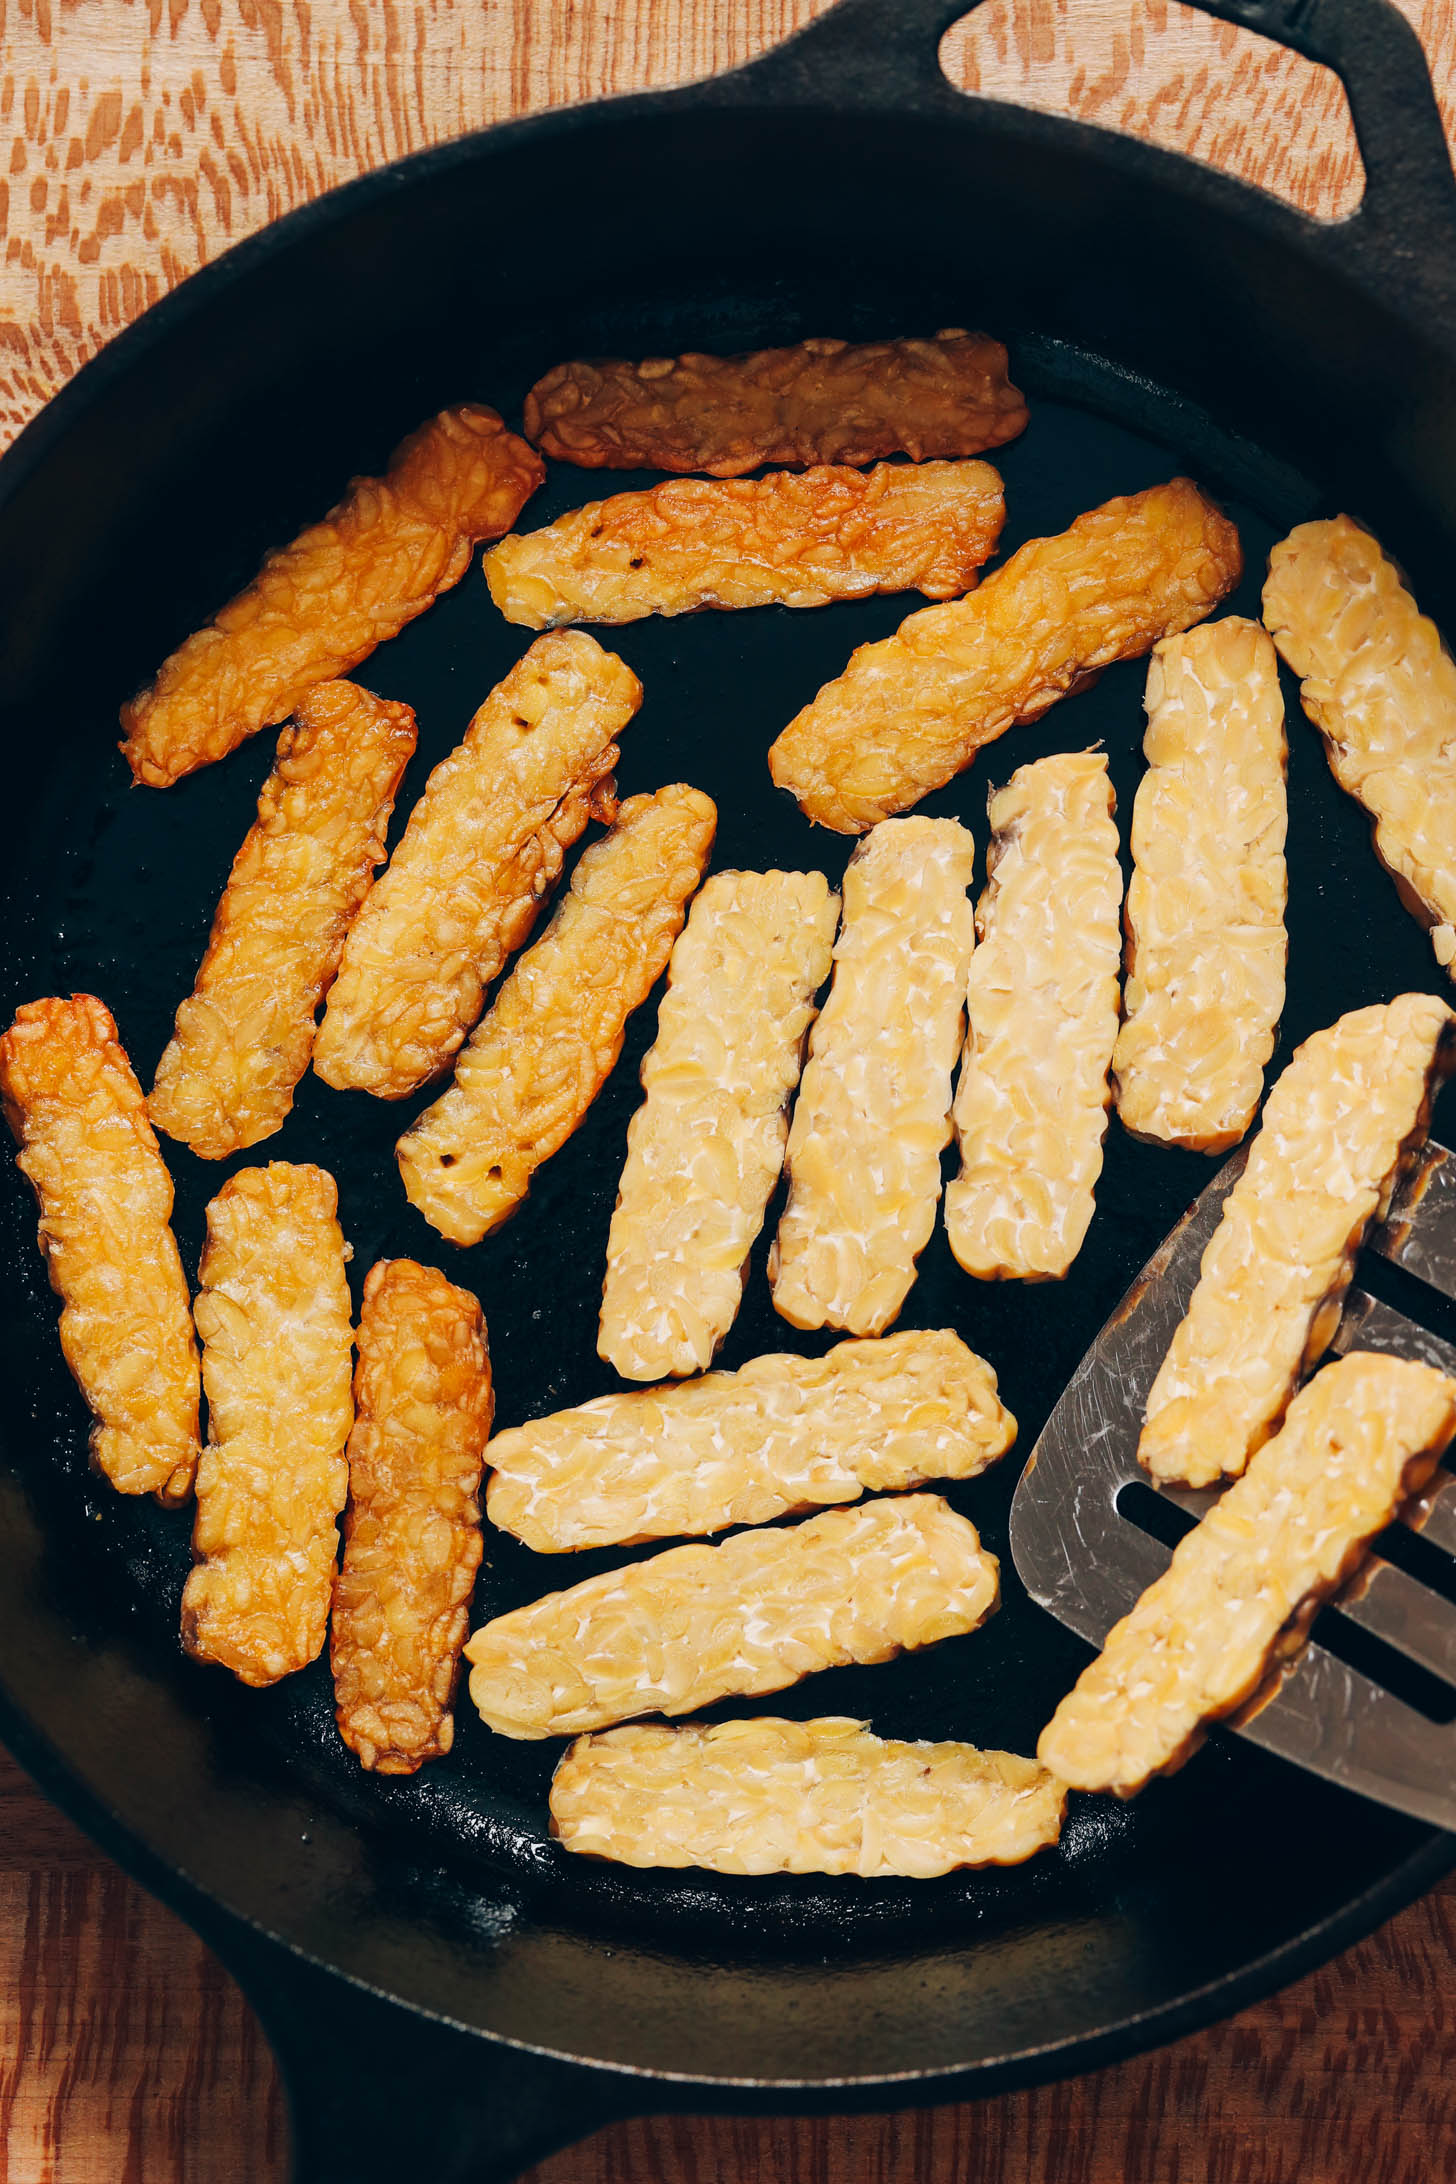 Cooking tempeh strips in a cast iron skillet